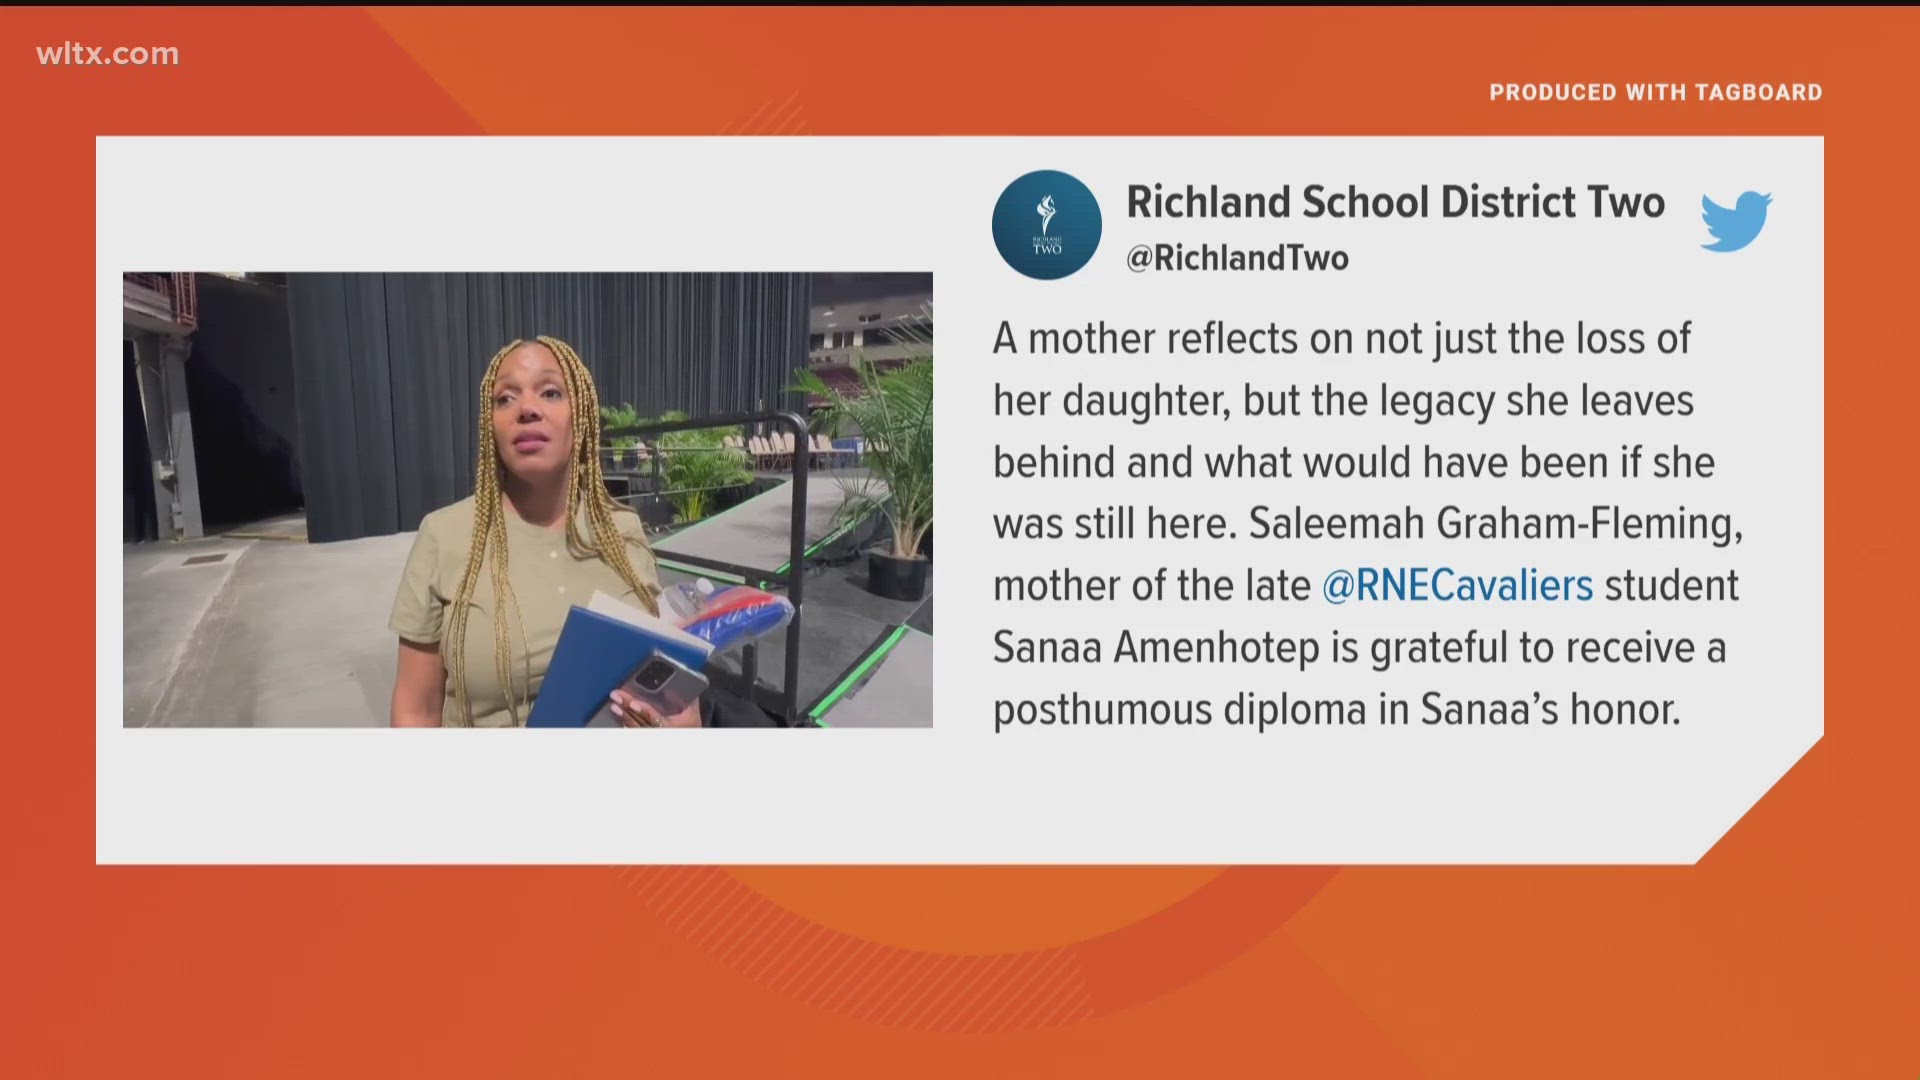 Saleemah Graham-Fleming accepted a posthumous diploma on behalf of Sanaa Amenhotep at Richland Northeast. The news comes weeks after a third conviction in her murder